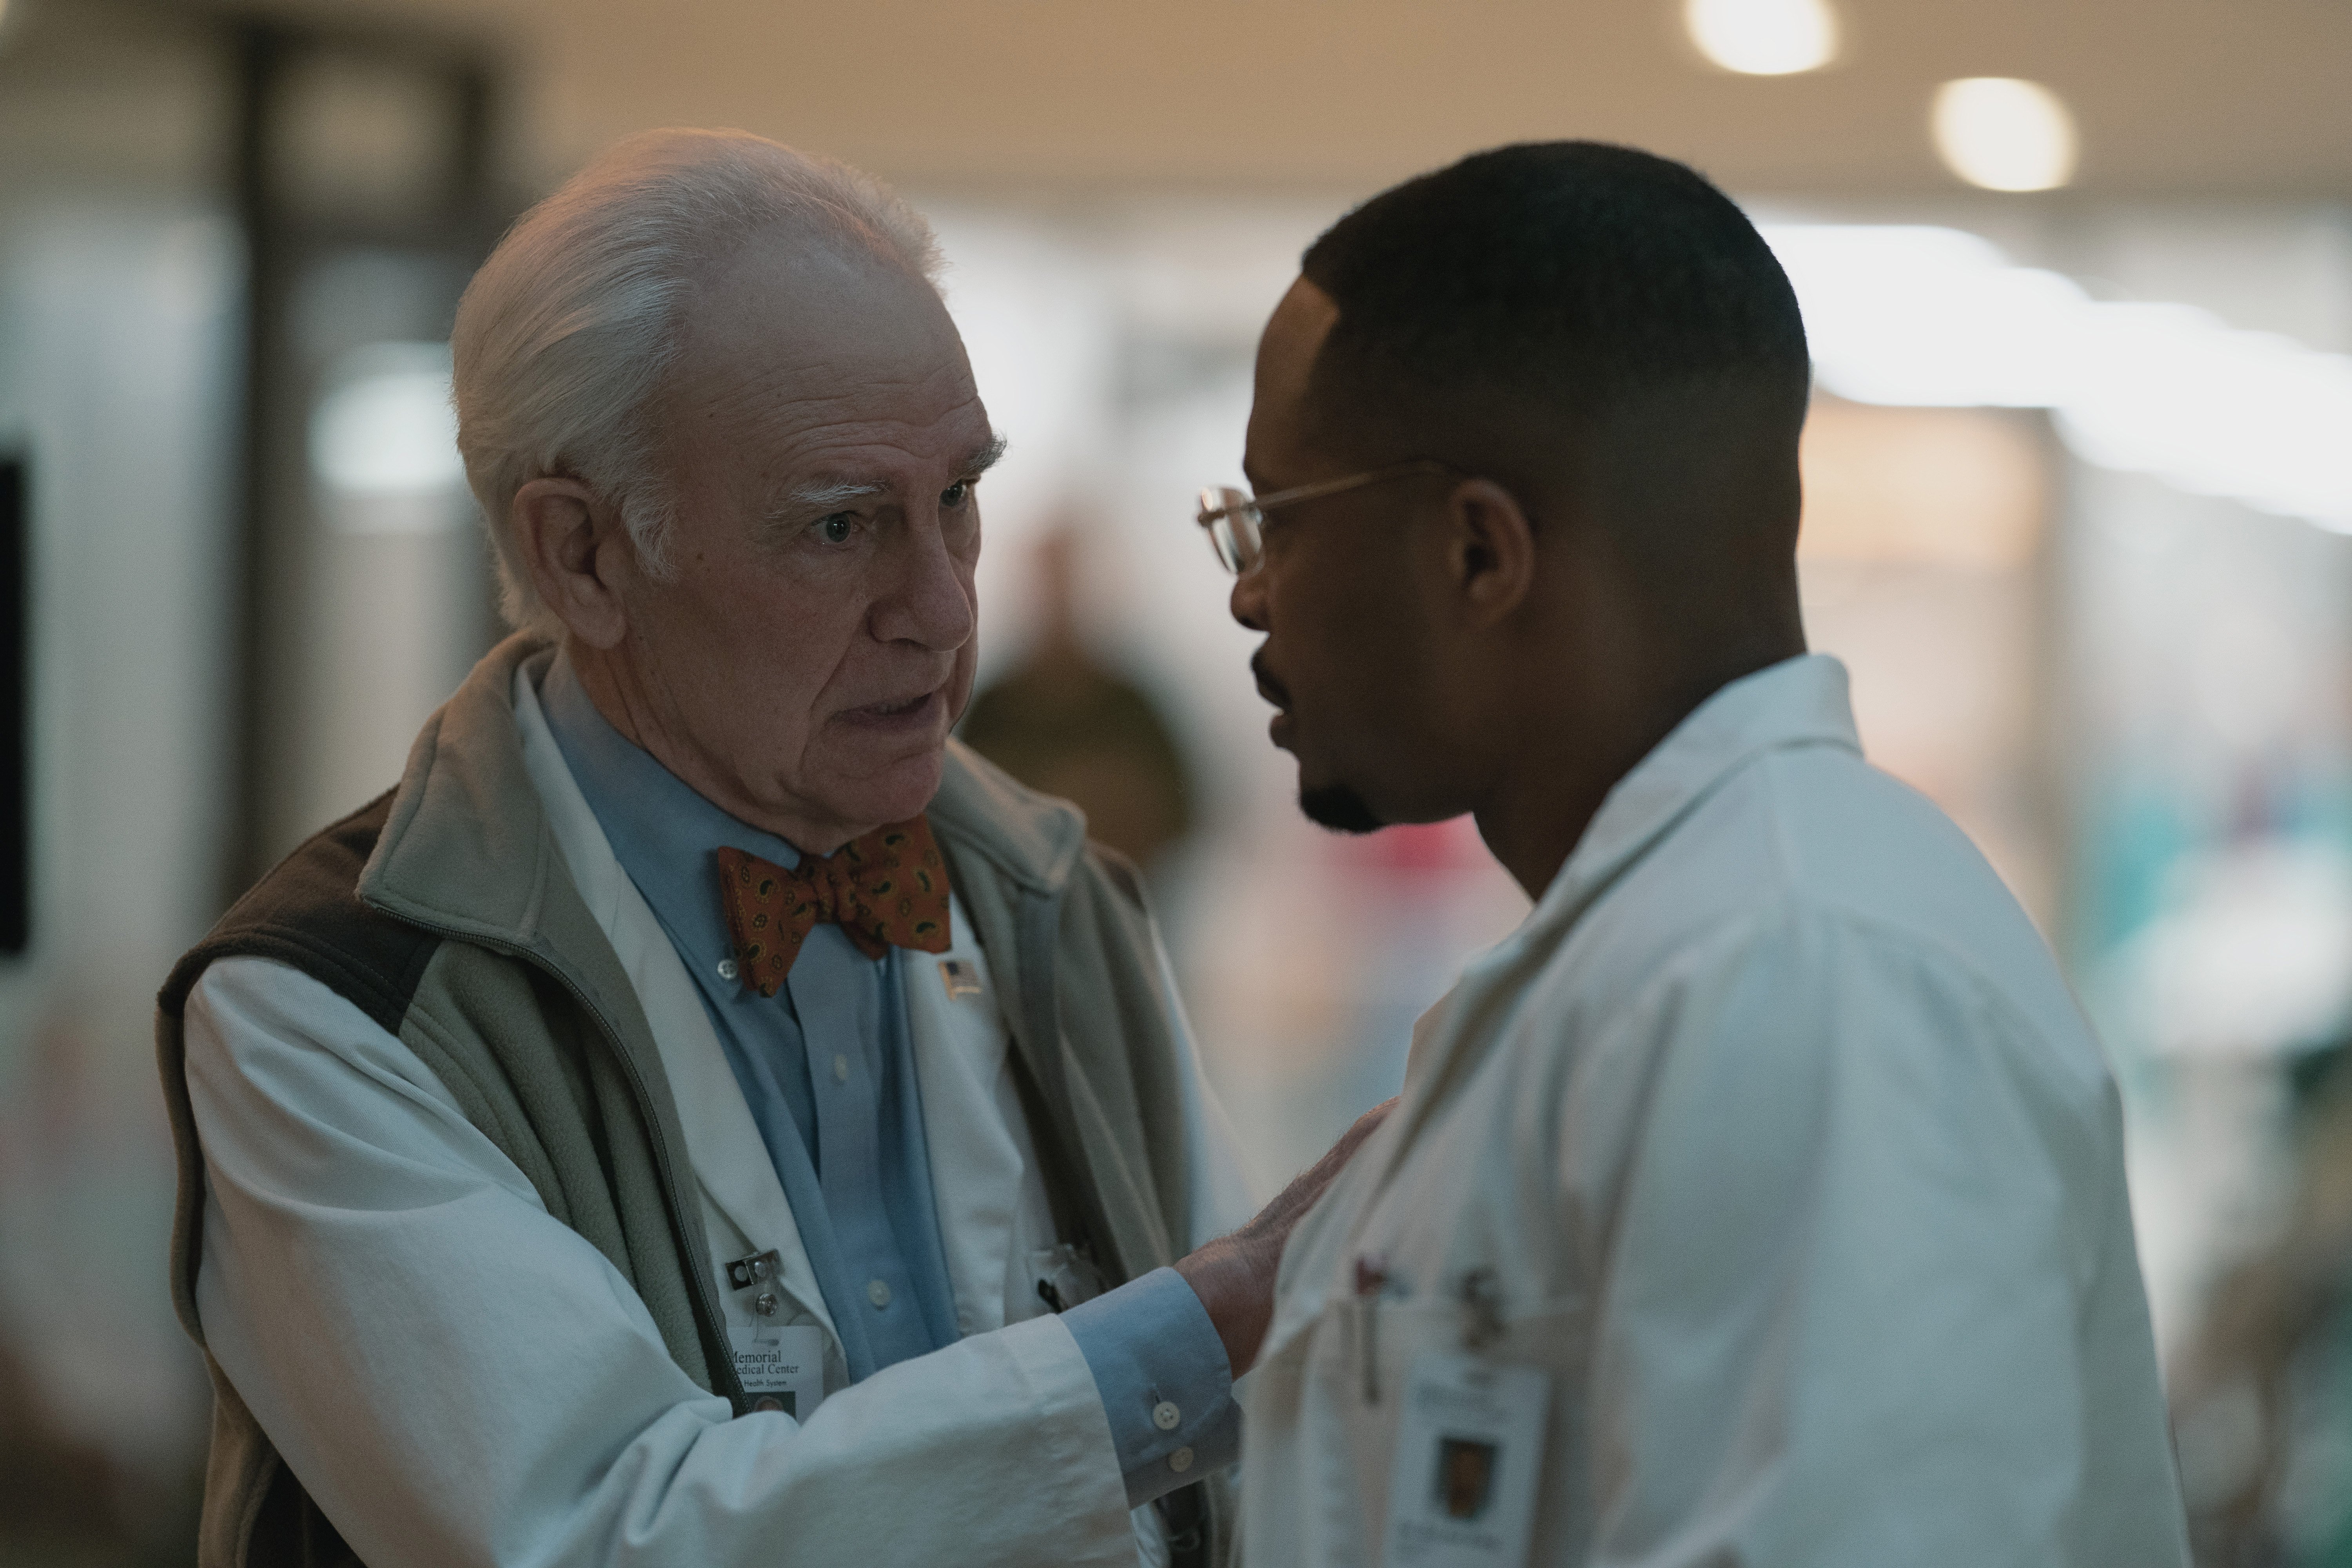 'Five Days At Memorial' cast members Robert Pine and Cornelius Smith Jr. looking at each other in conversation